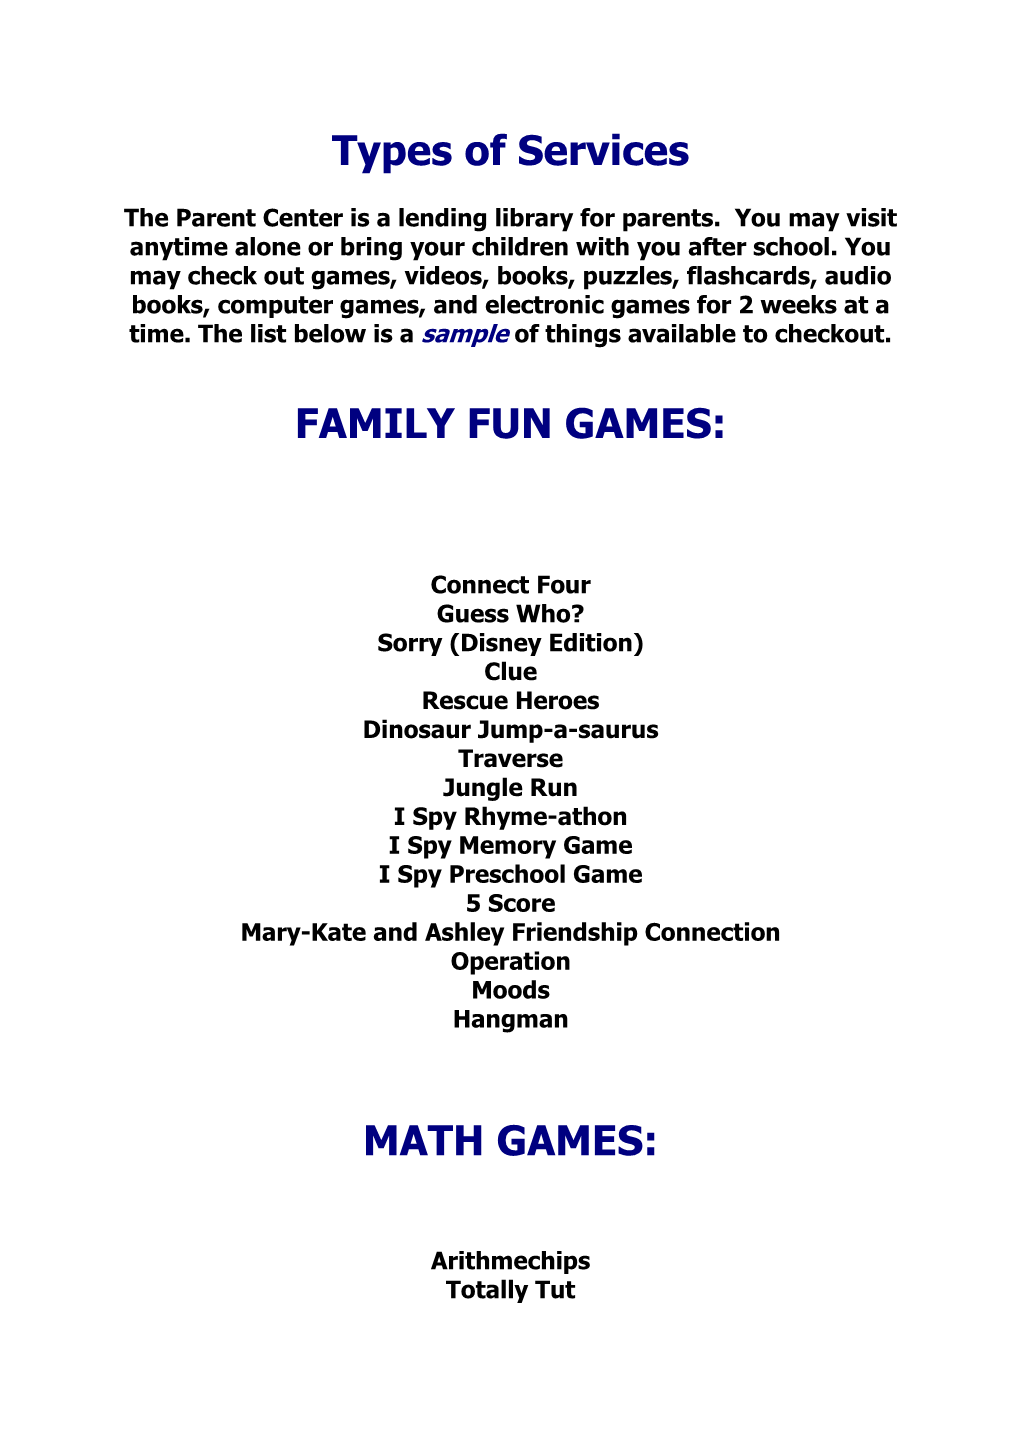 Types of Services FAMILY FUN GAMES: MATH GAMES